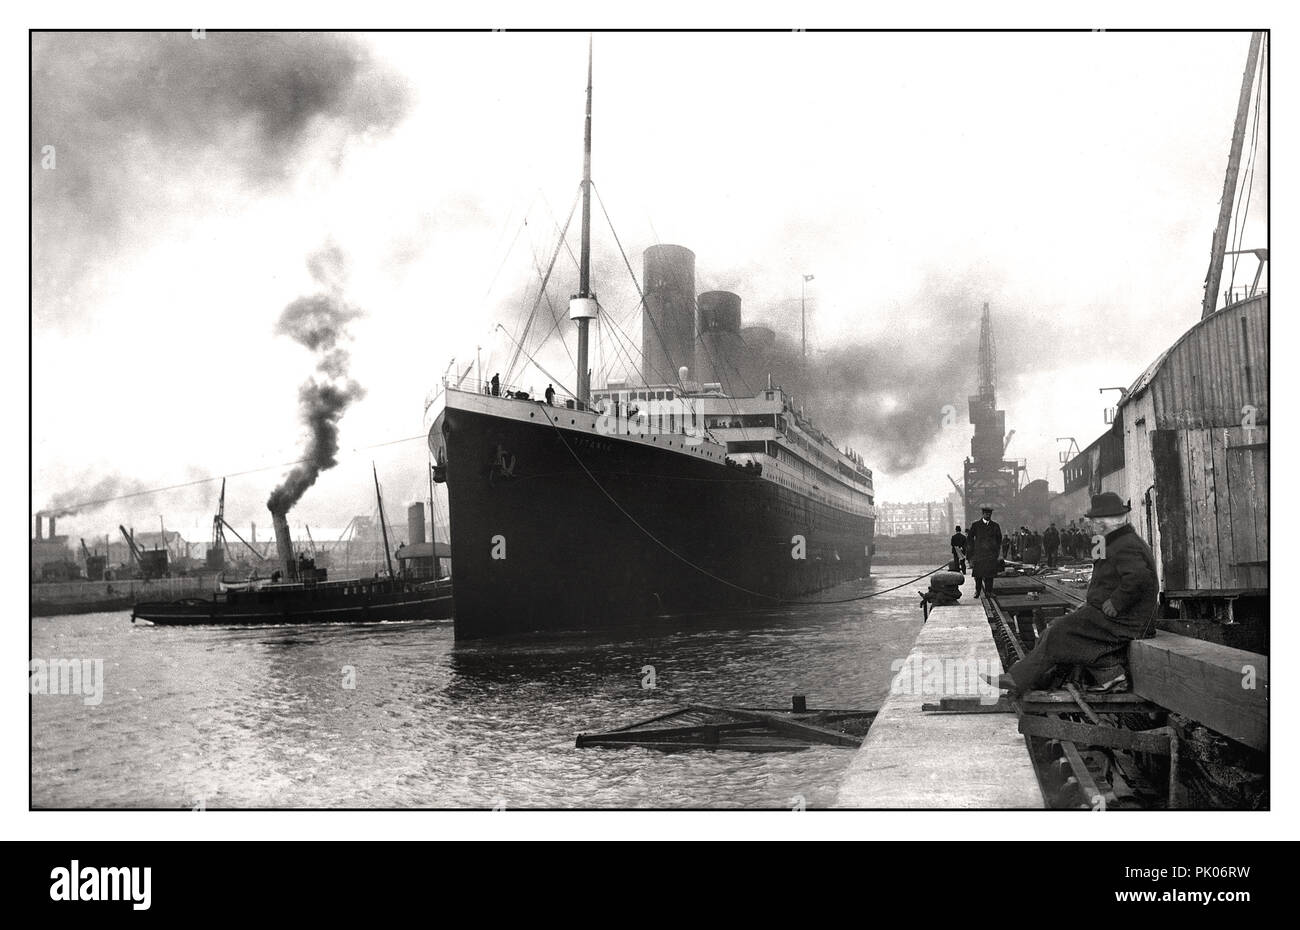 TITANIC 1912 RMS TITANIC leaving Harland & Wolff shipyards April 2nd 1912 Sombre still dawn image of Titanic casting off on her fateful maiden voyage Stock Photo